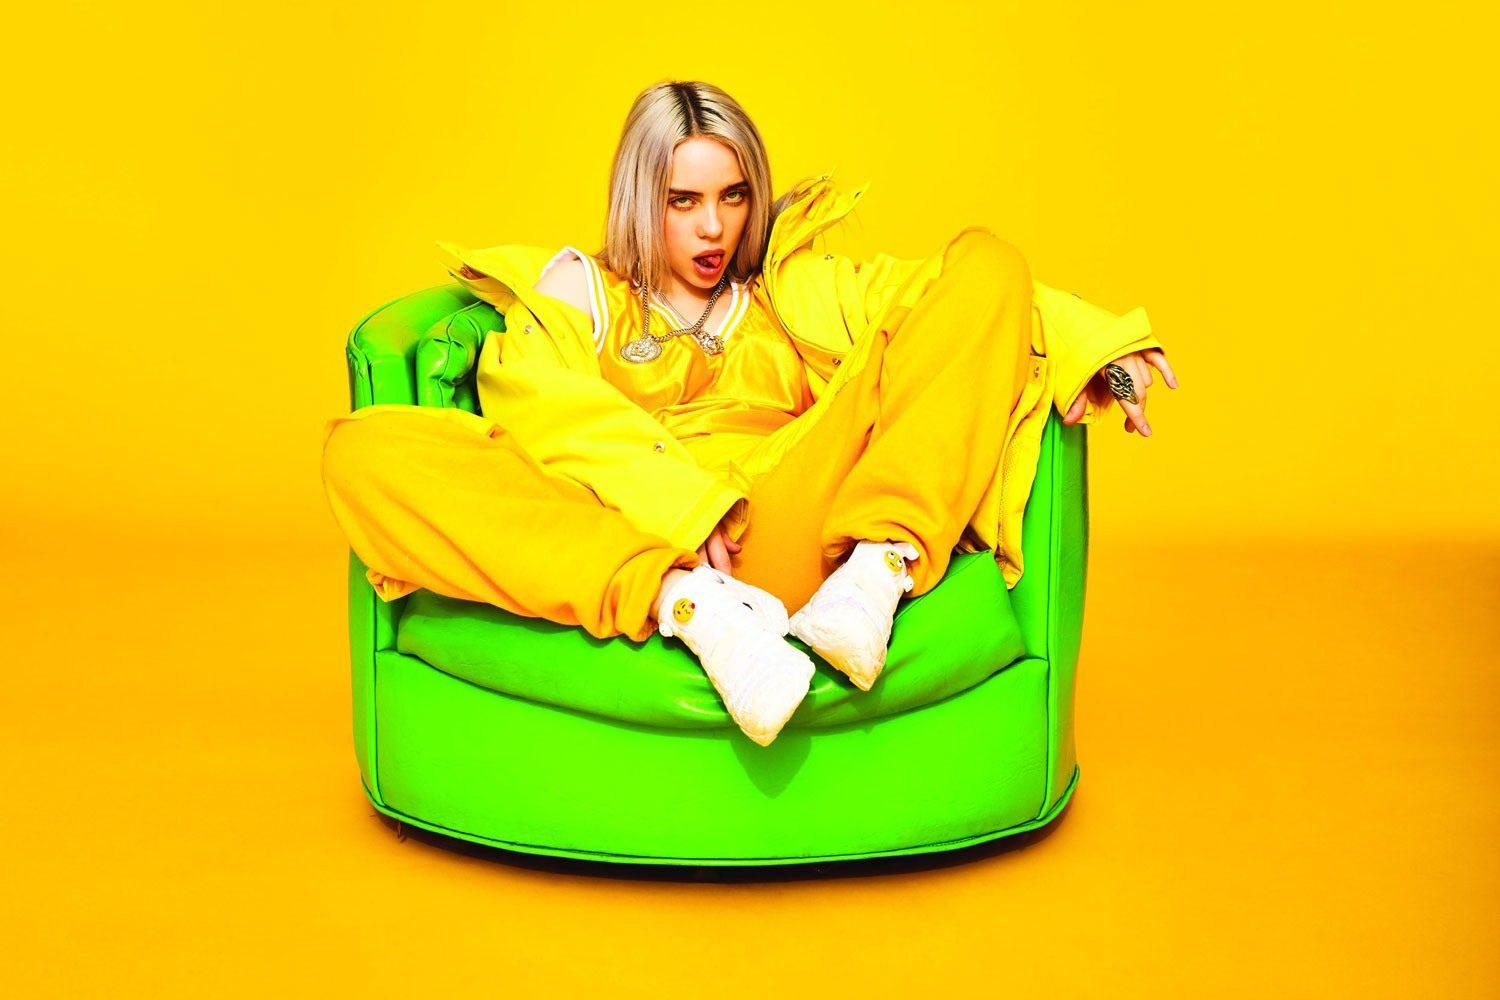 Billie Eilish has released a brand new song called 'when the party's